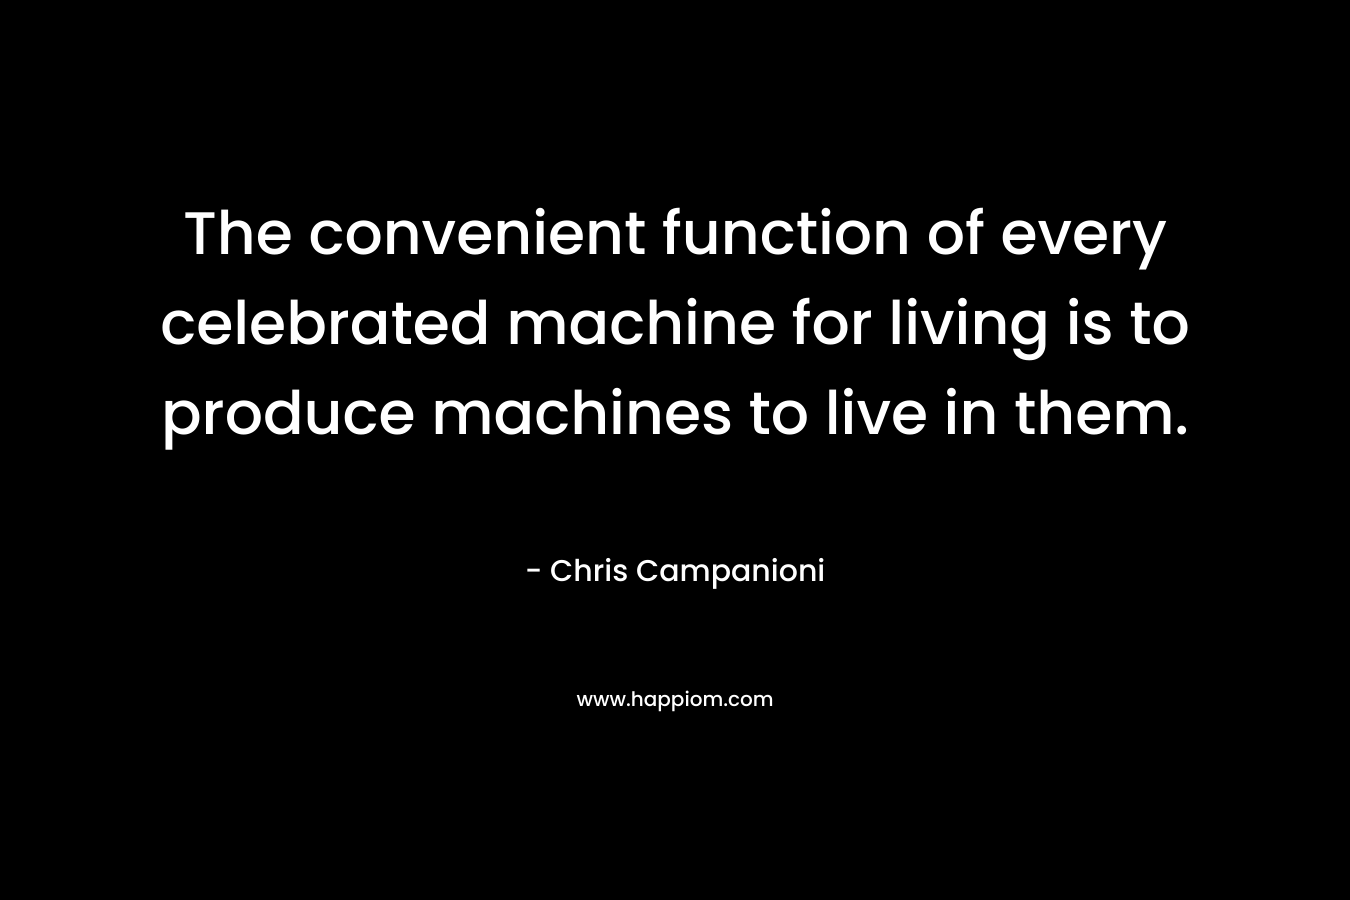 The convenient function of every celebrated machine for living is to produce machines to live in them. – Chris Campanioni